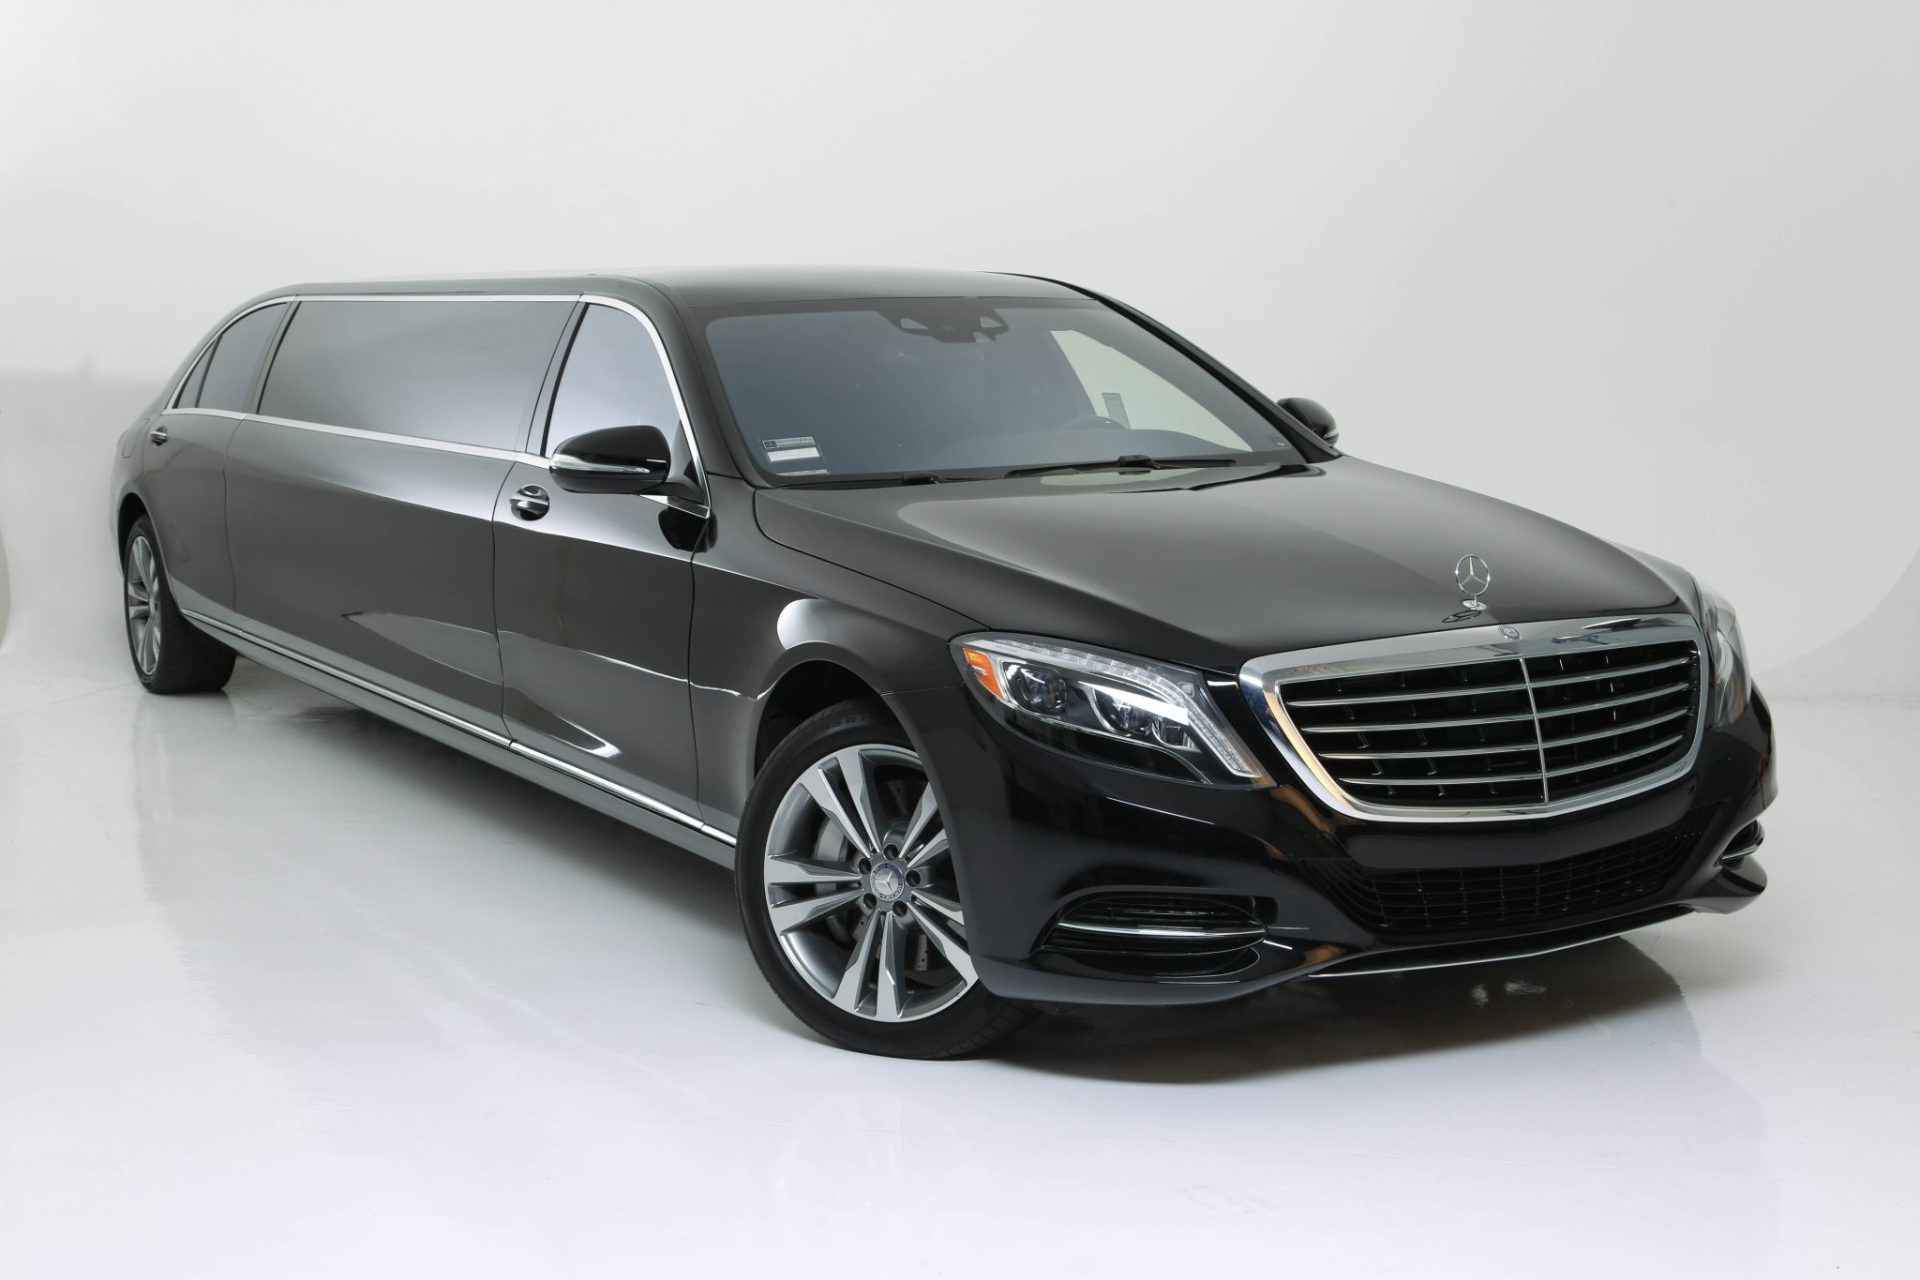 Mercedes Benz S-Class Stretched Limousine